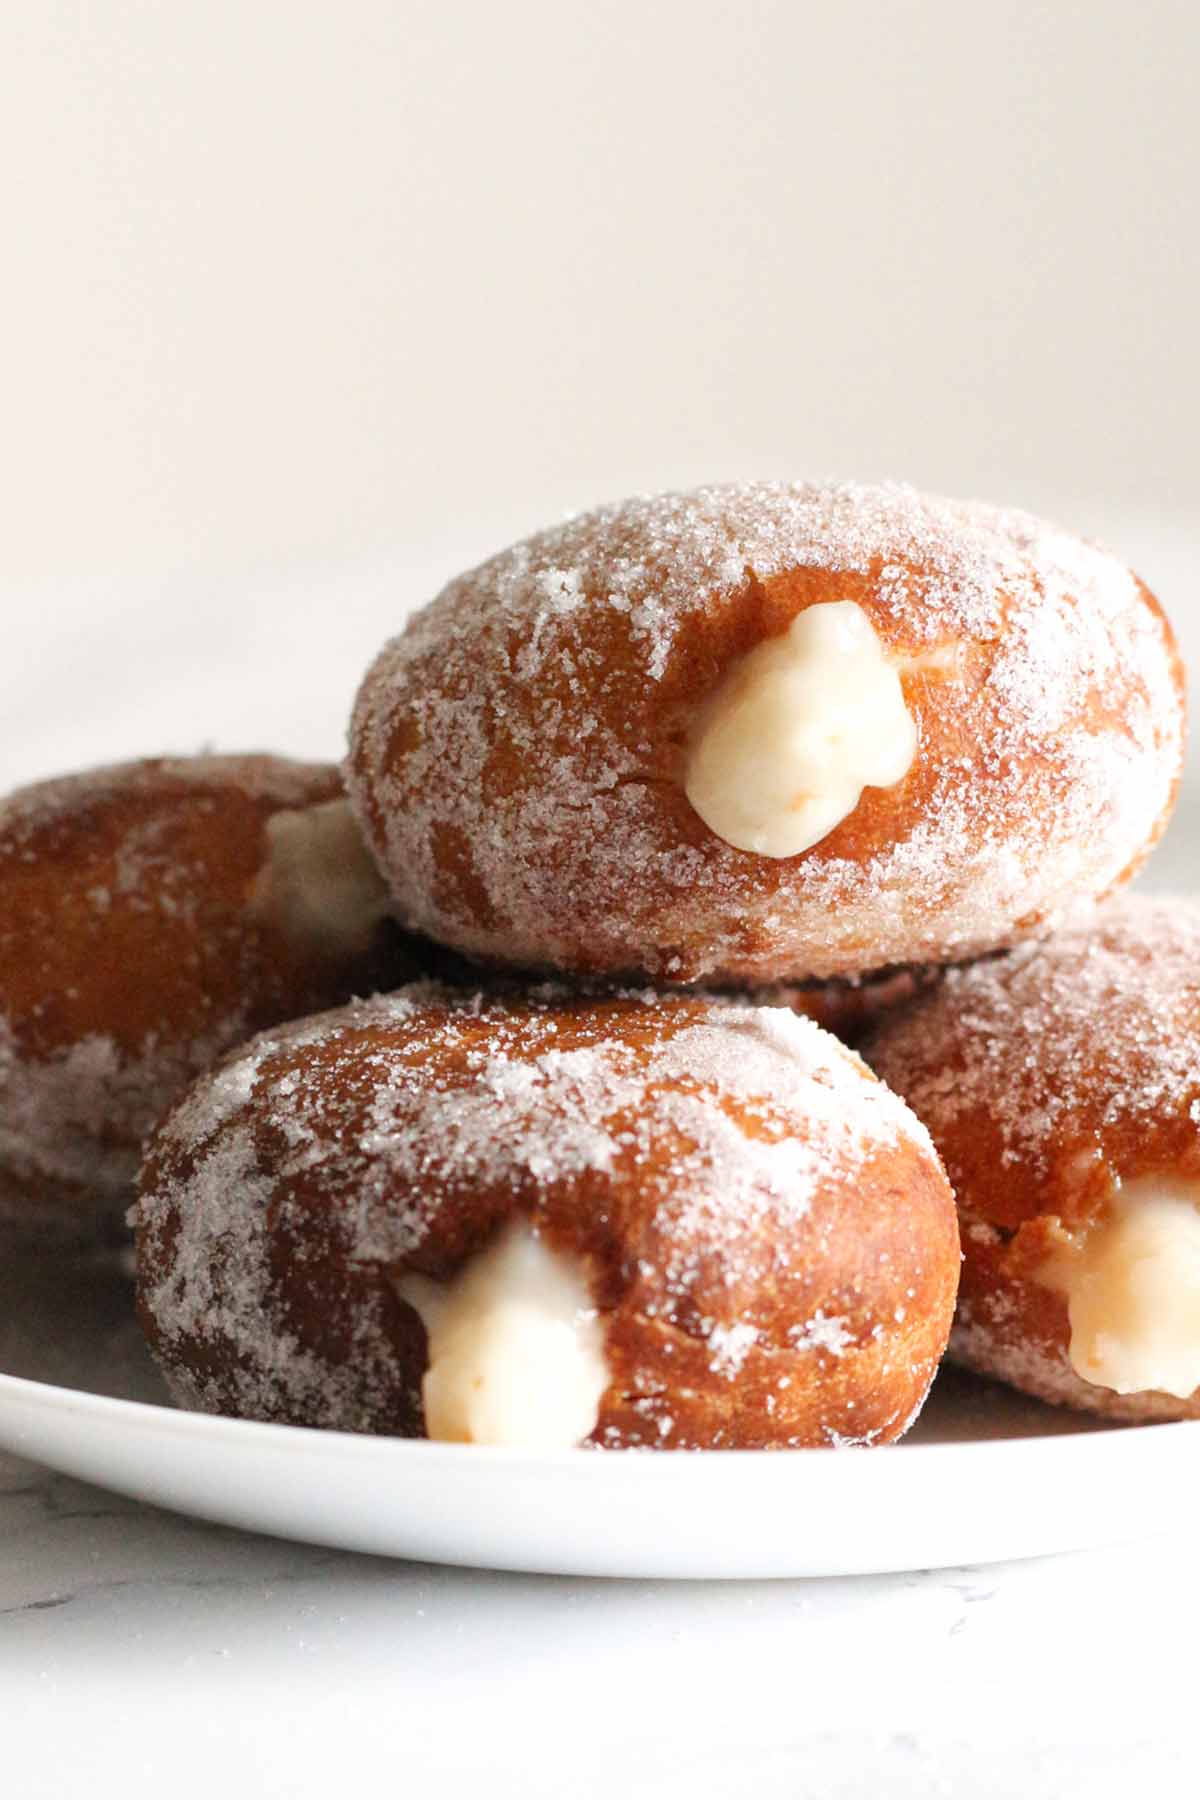 Pile of Eggless Air Fryer Donuts Filled With Dairy Free Cream Custard